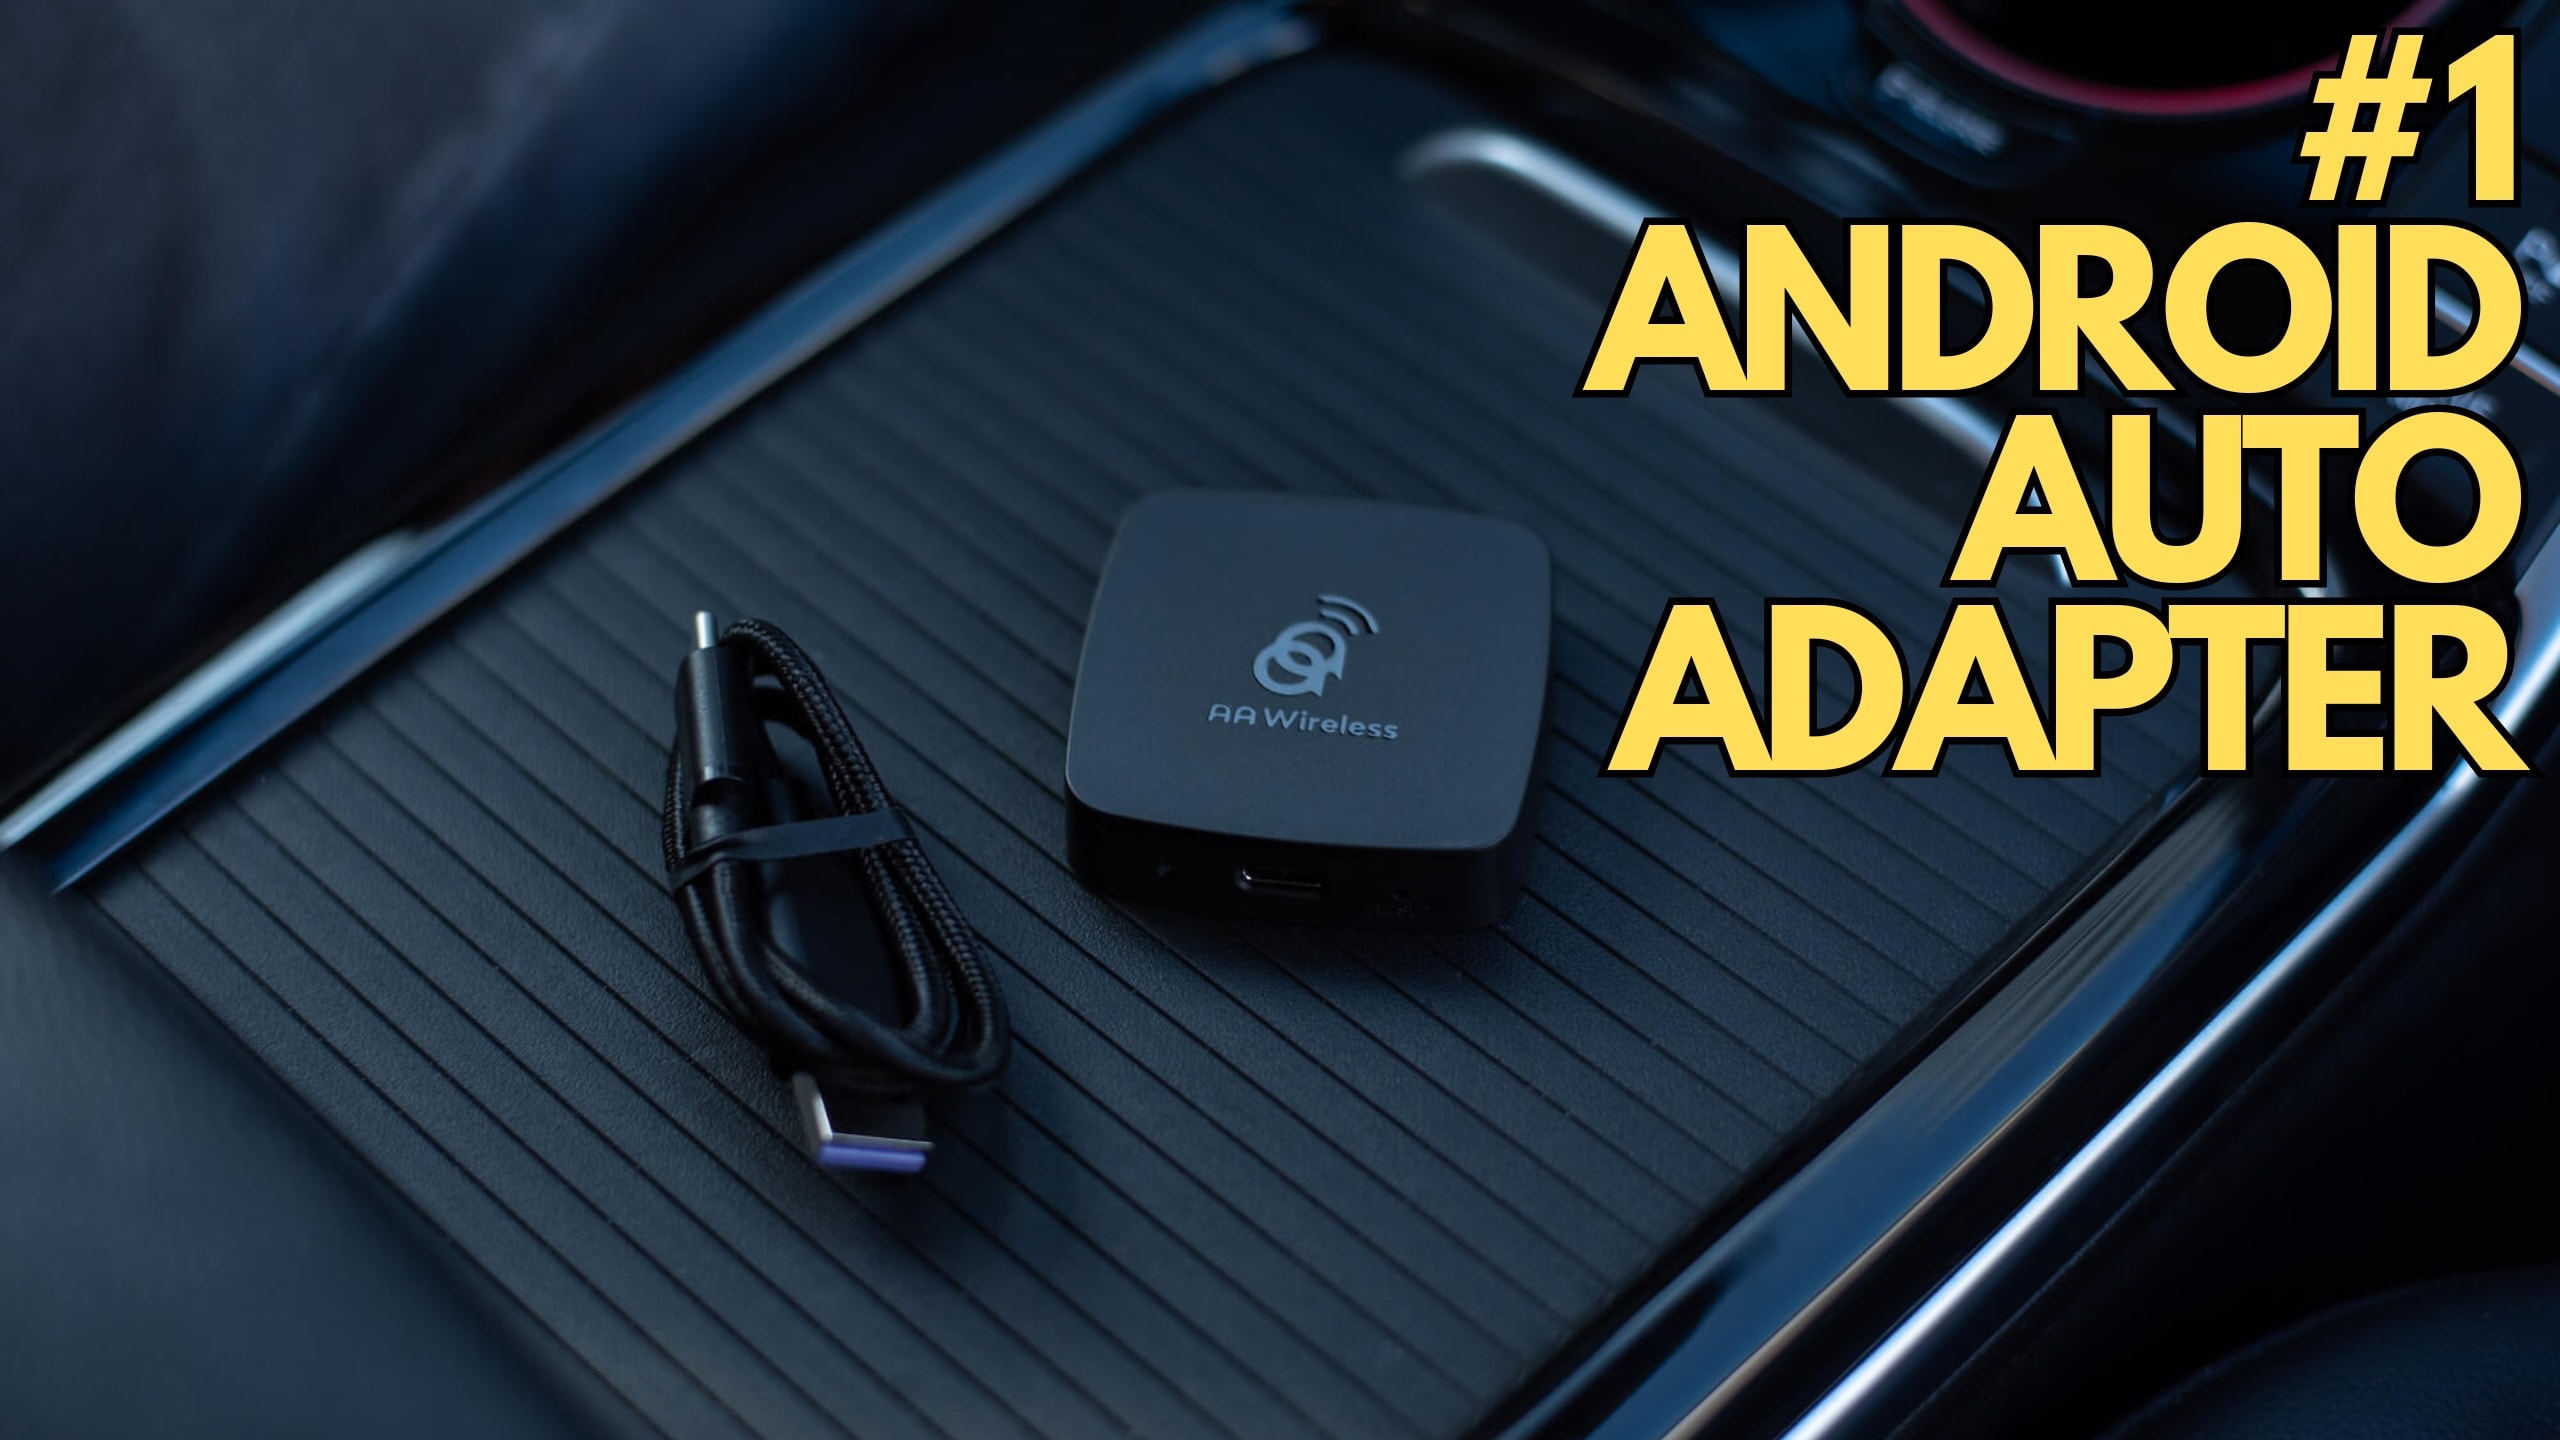 https://s1.cdn.autoevolution.com/images/news/why-the-world-s-number-one-wireless-android-auto-adapter-went-dark-in-the-us-225551_1.jpg